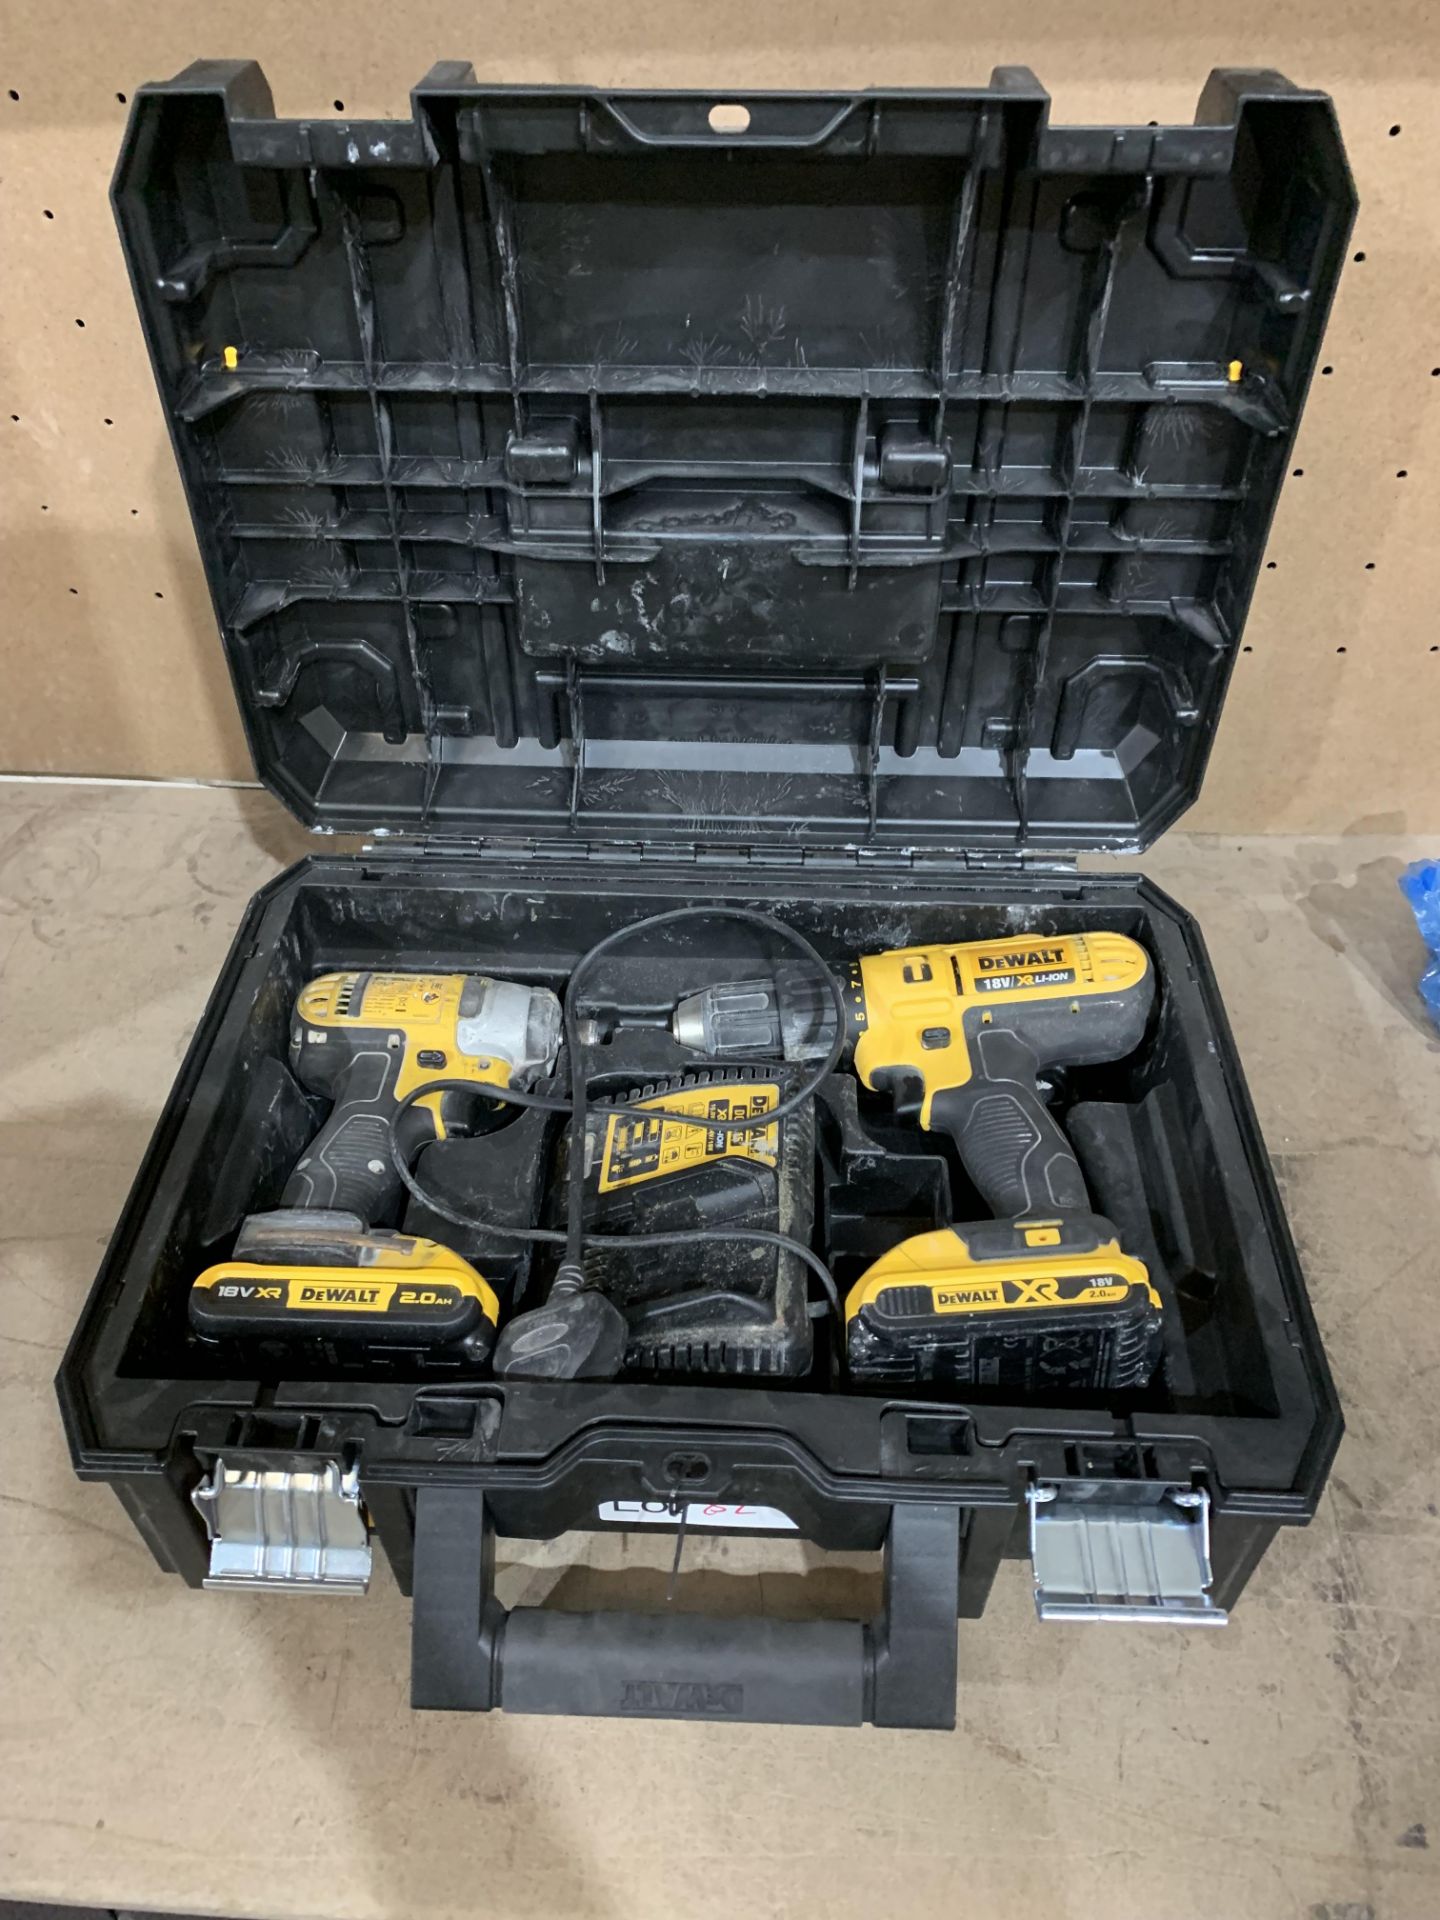 DEWALT TWIN PACK IMPACT DRIVER AND COMBI DRILL COMES WITH 2 BATTERIES, CHARGER AND CARRY CASE (